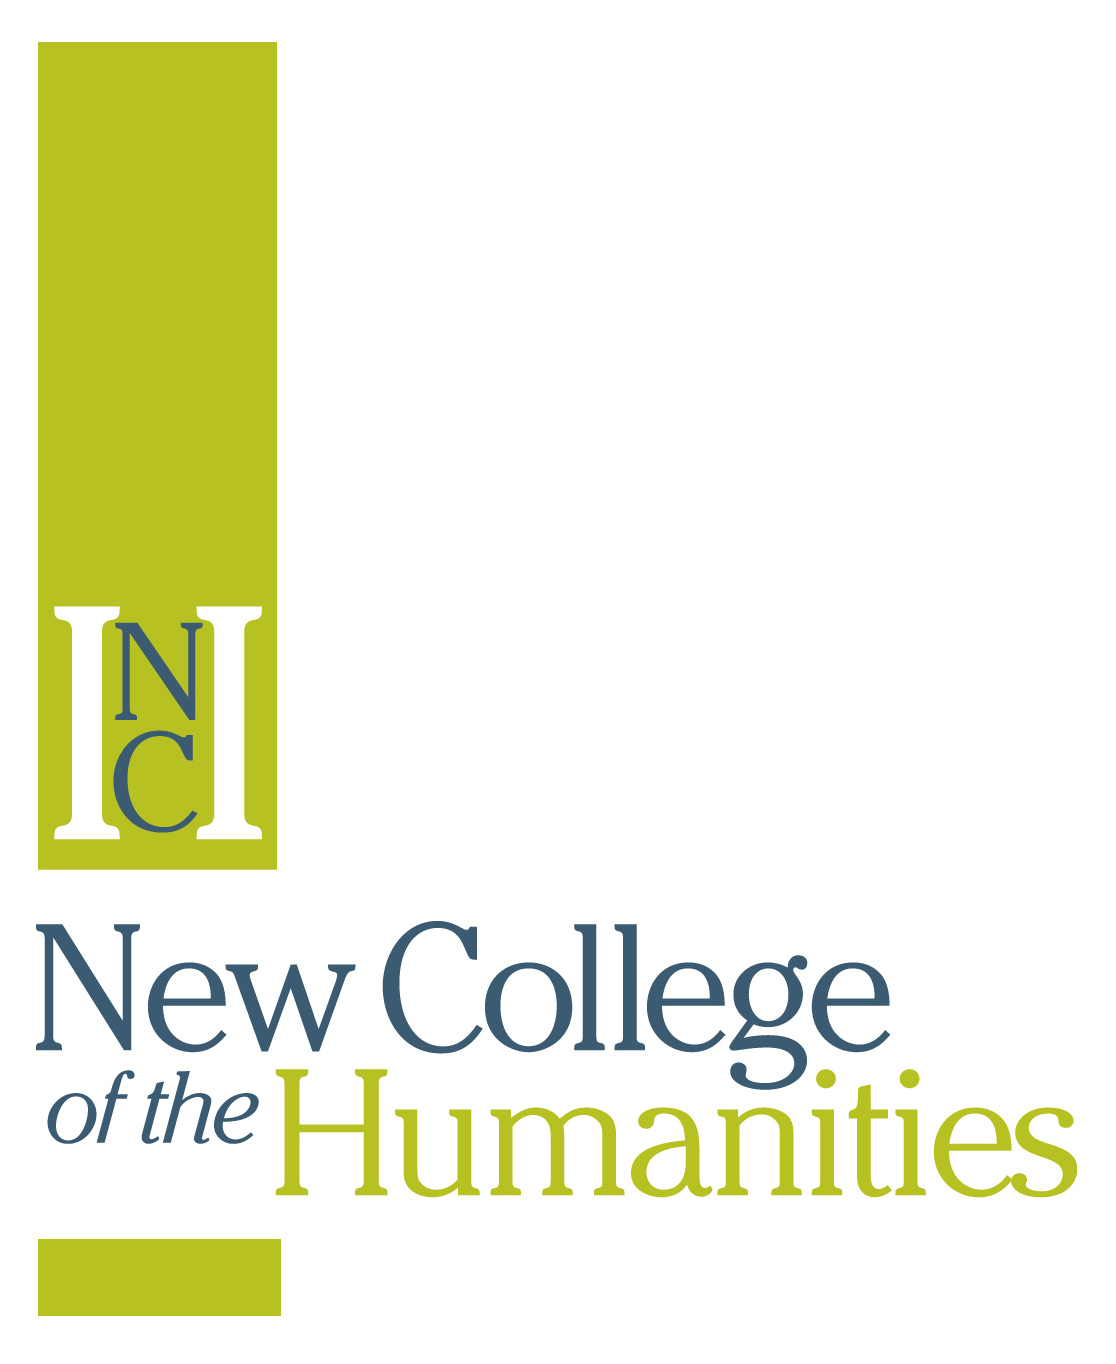 New College of the Humanities at Northeastern - Wikipedia